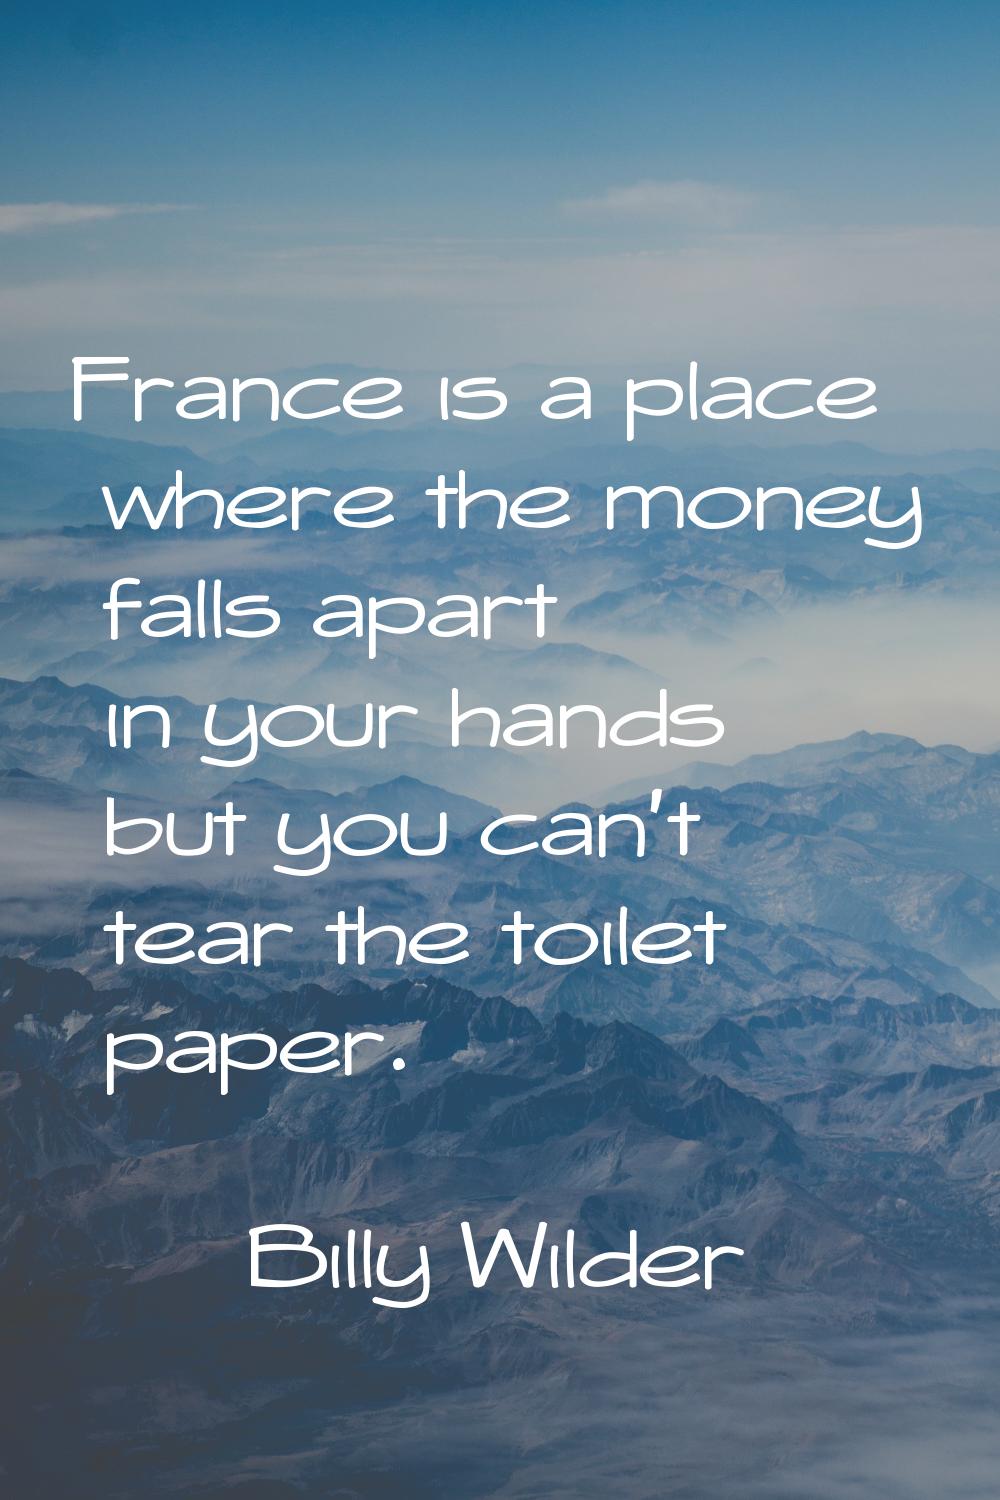 France is a place where the money falls apart in your hands but you can't tear the toilet paper.